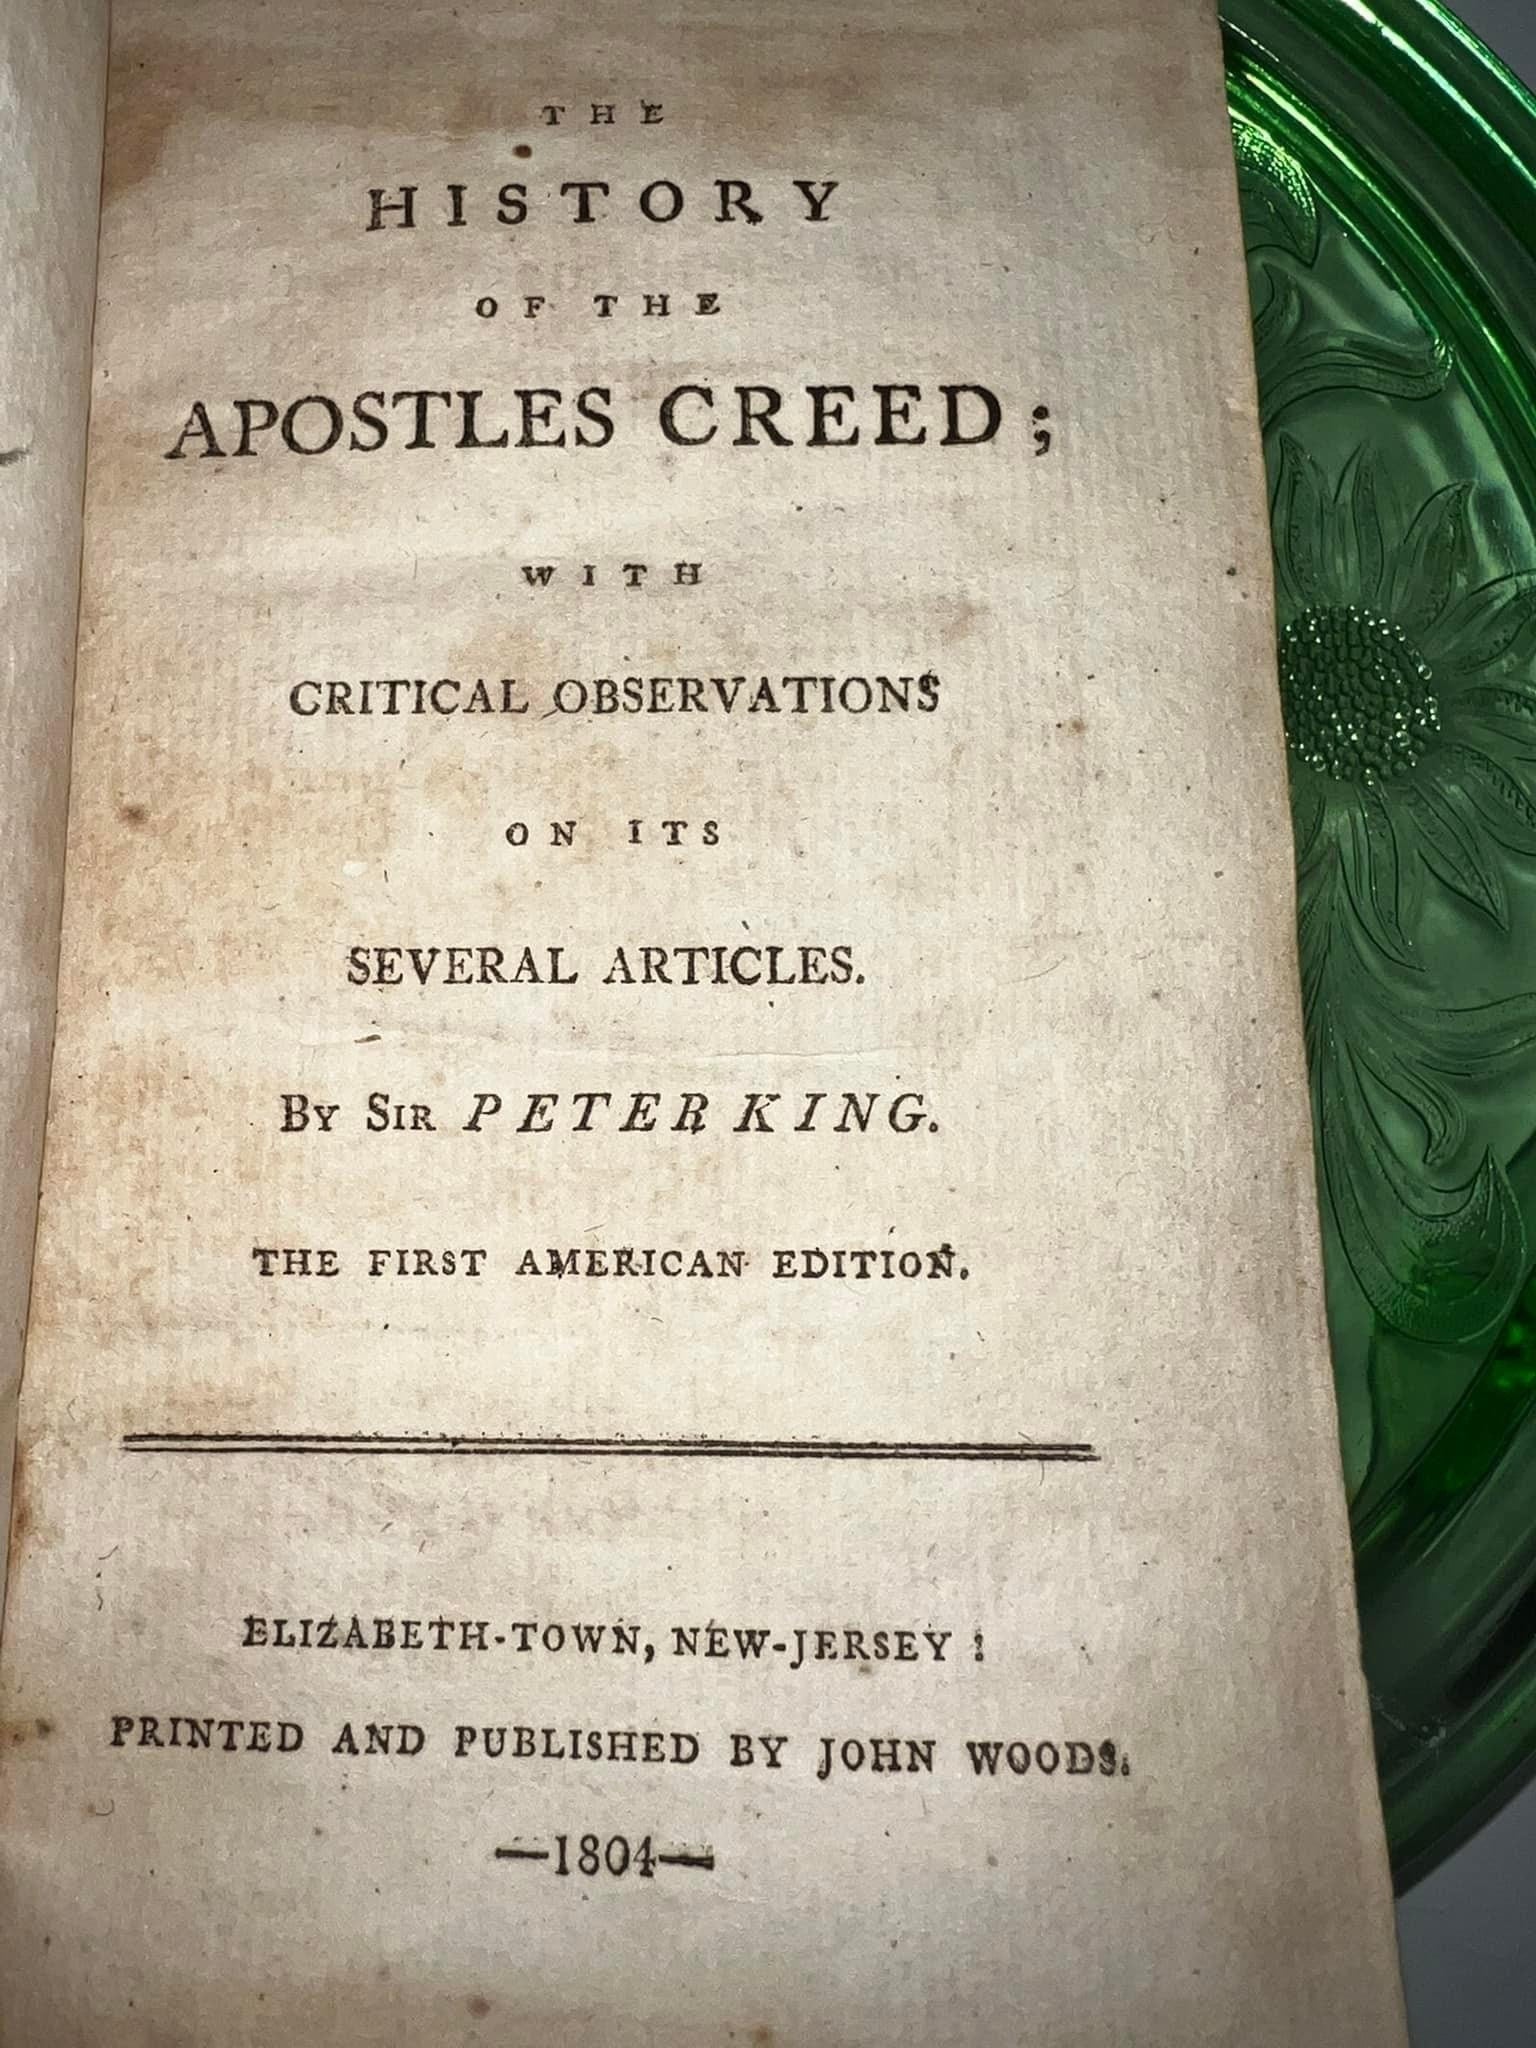 Antique pre civil war The history of The apostle’s creed 1804 first American edition Leather bound religious